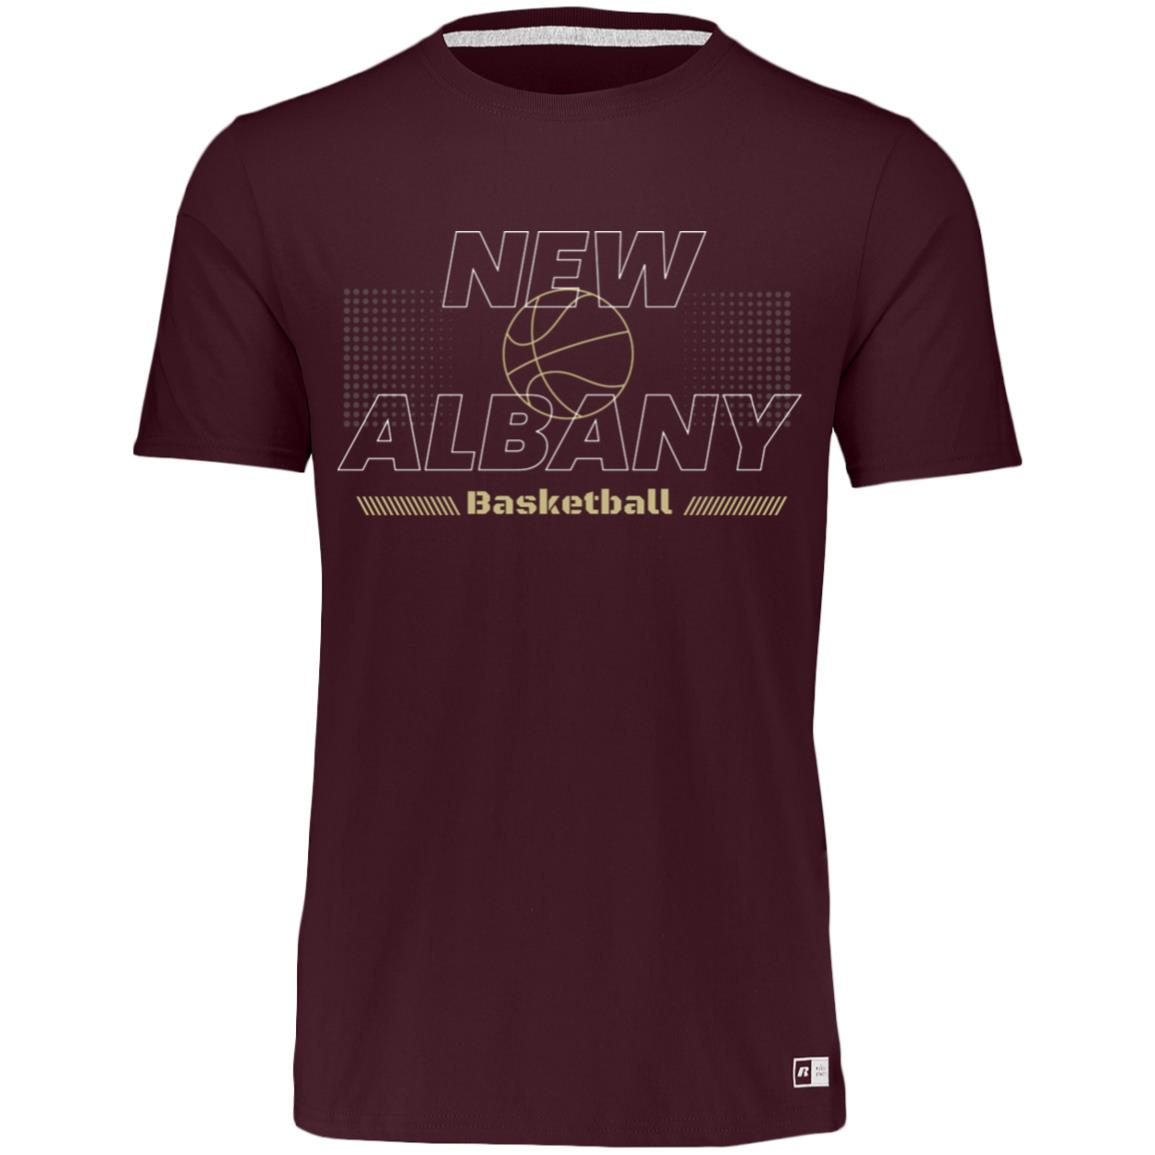 Youth Essential Dri-Power Basketball Short Sleeve Graphic Tee - New Albany Eagles